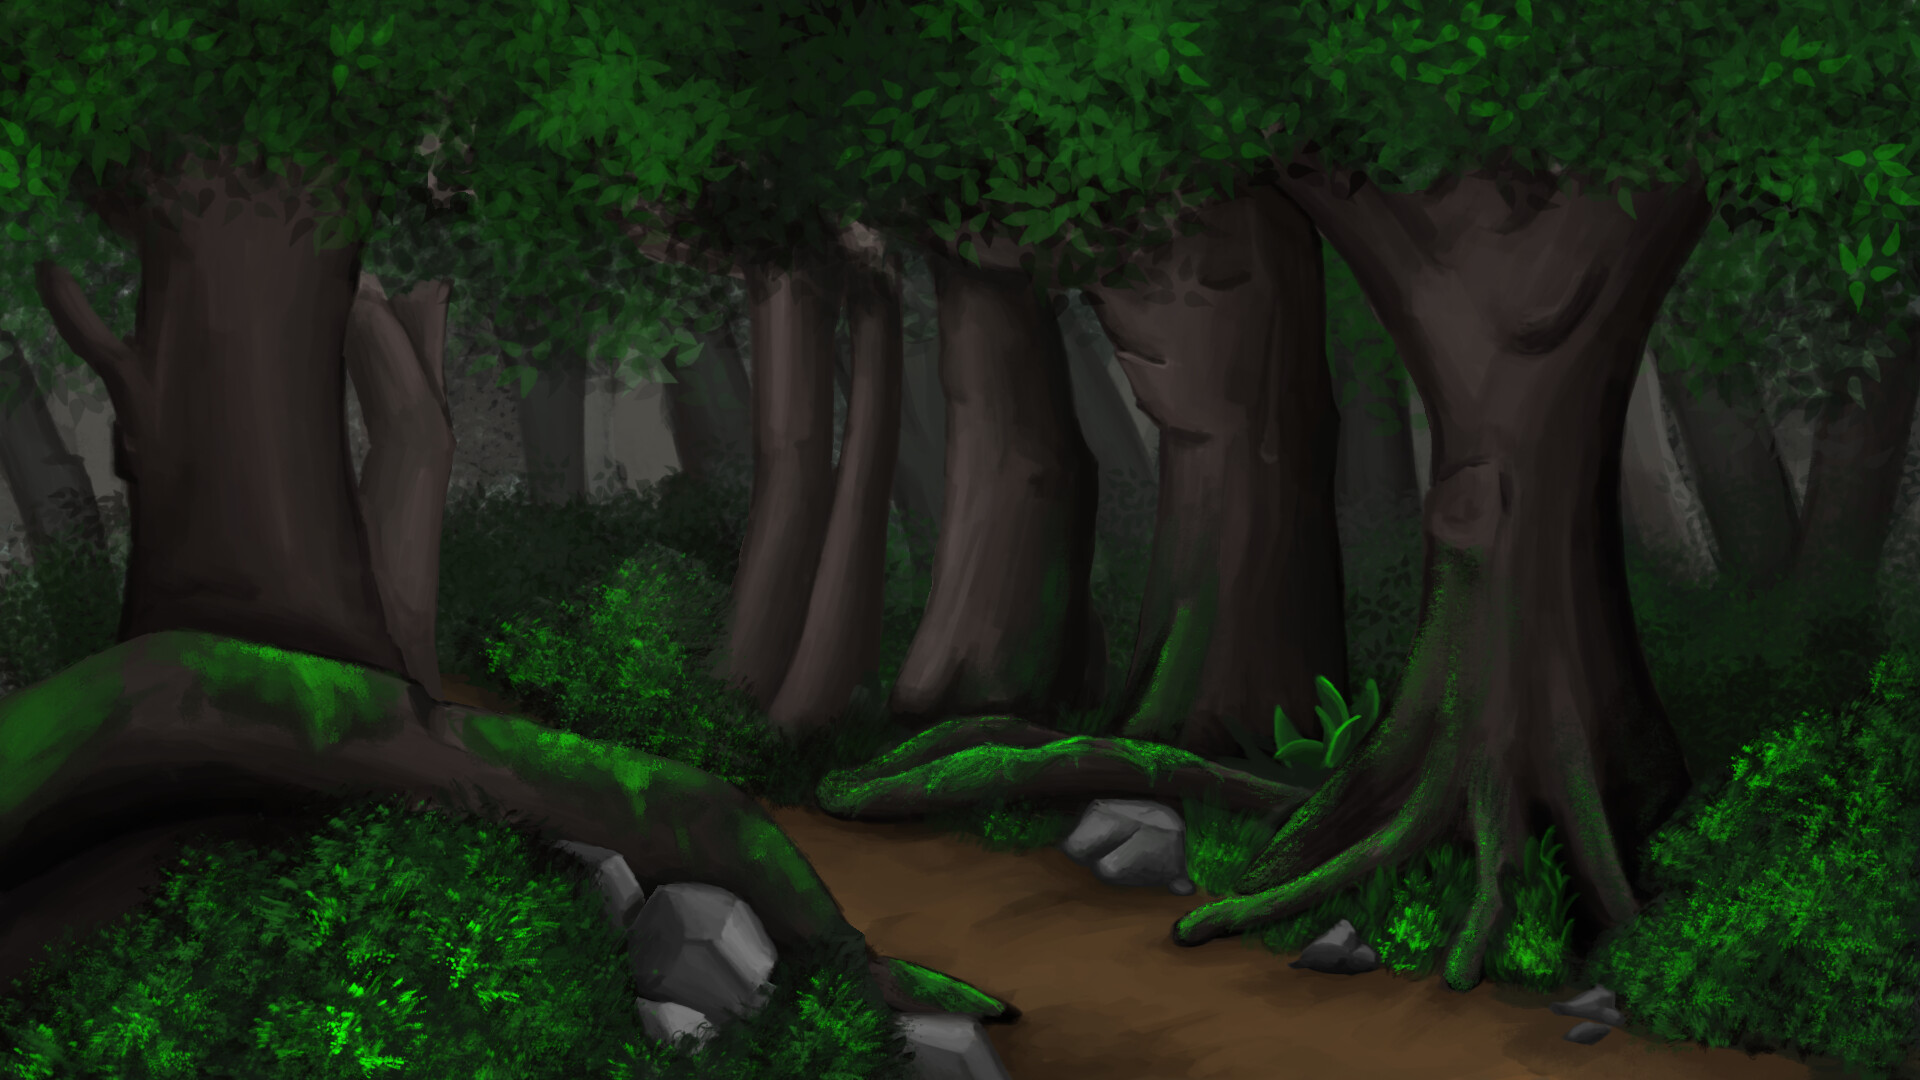 Painted Forest Background